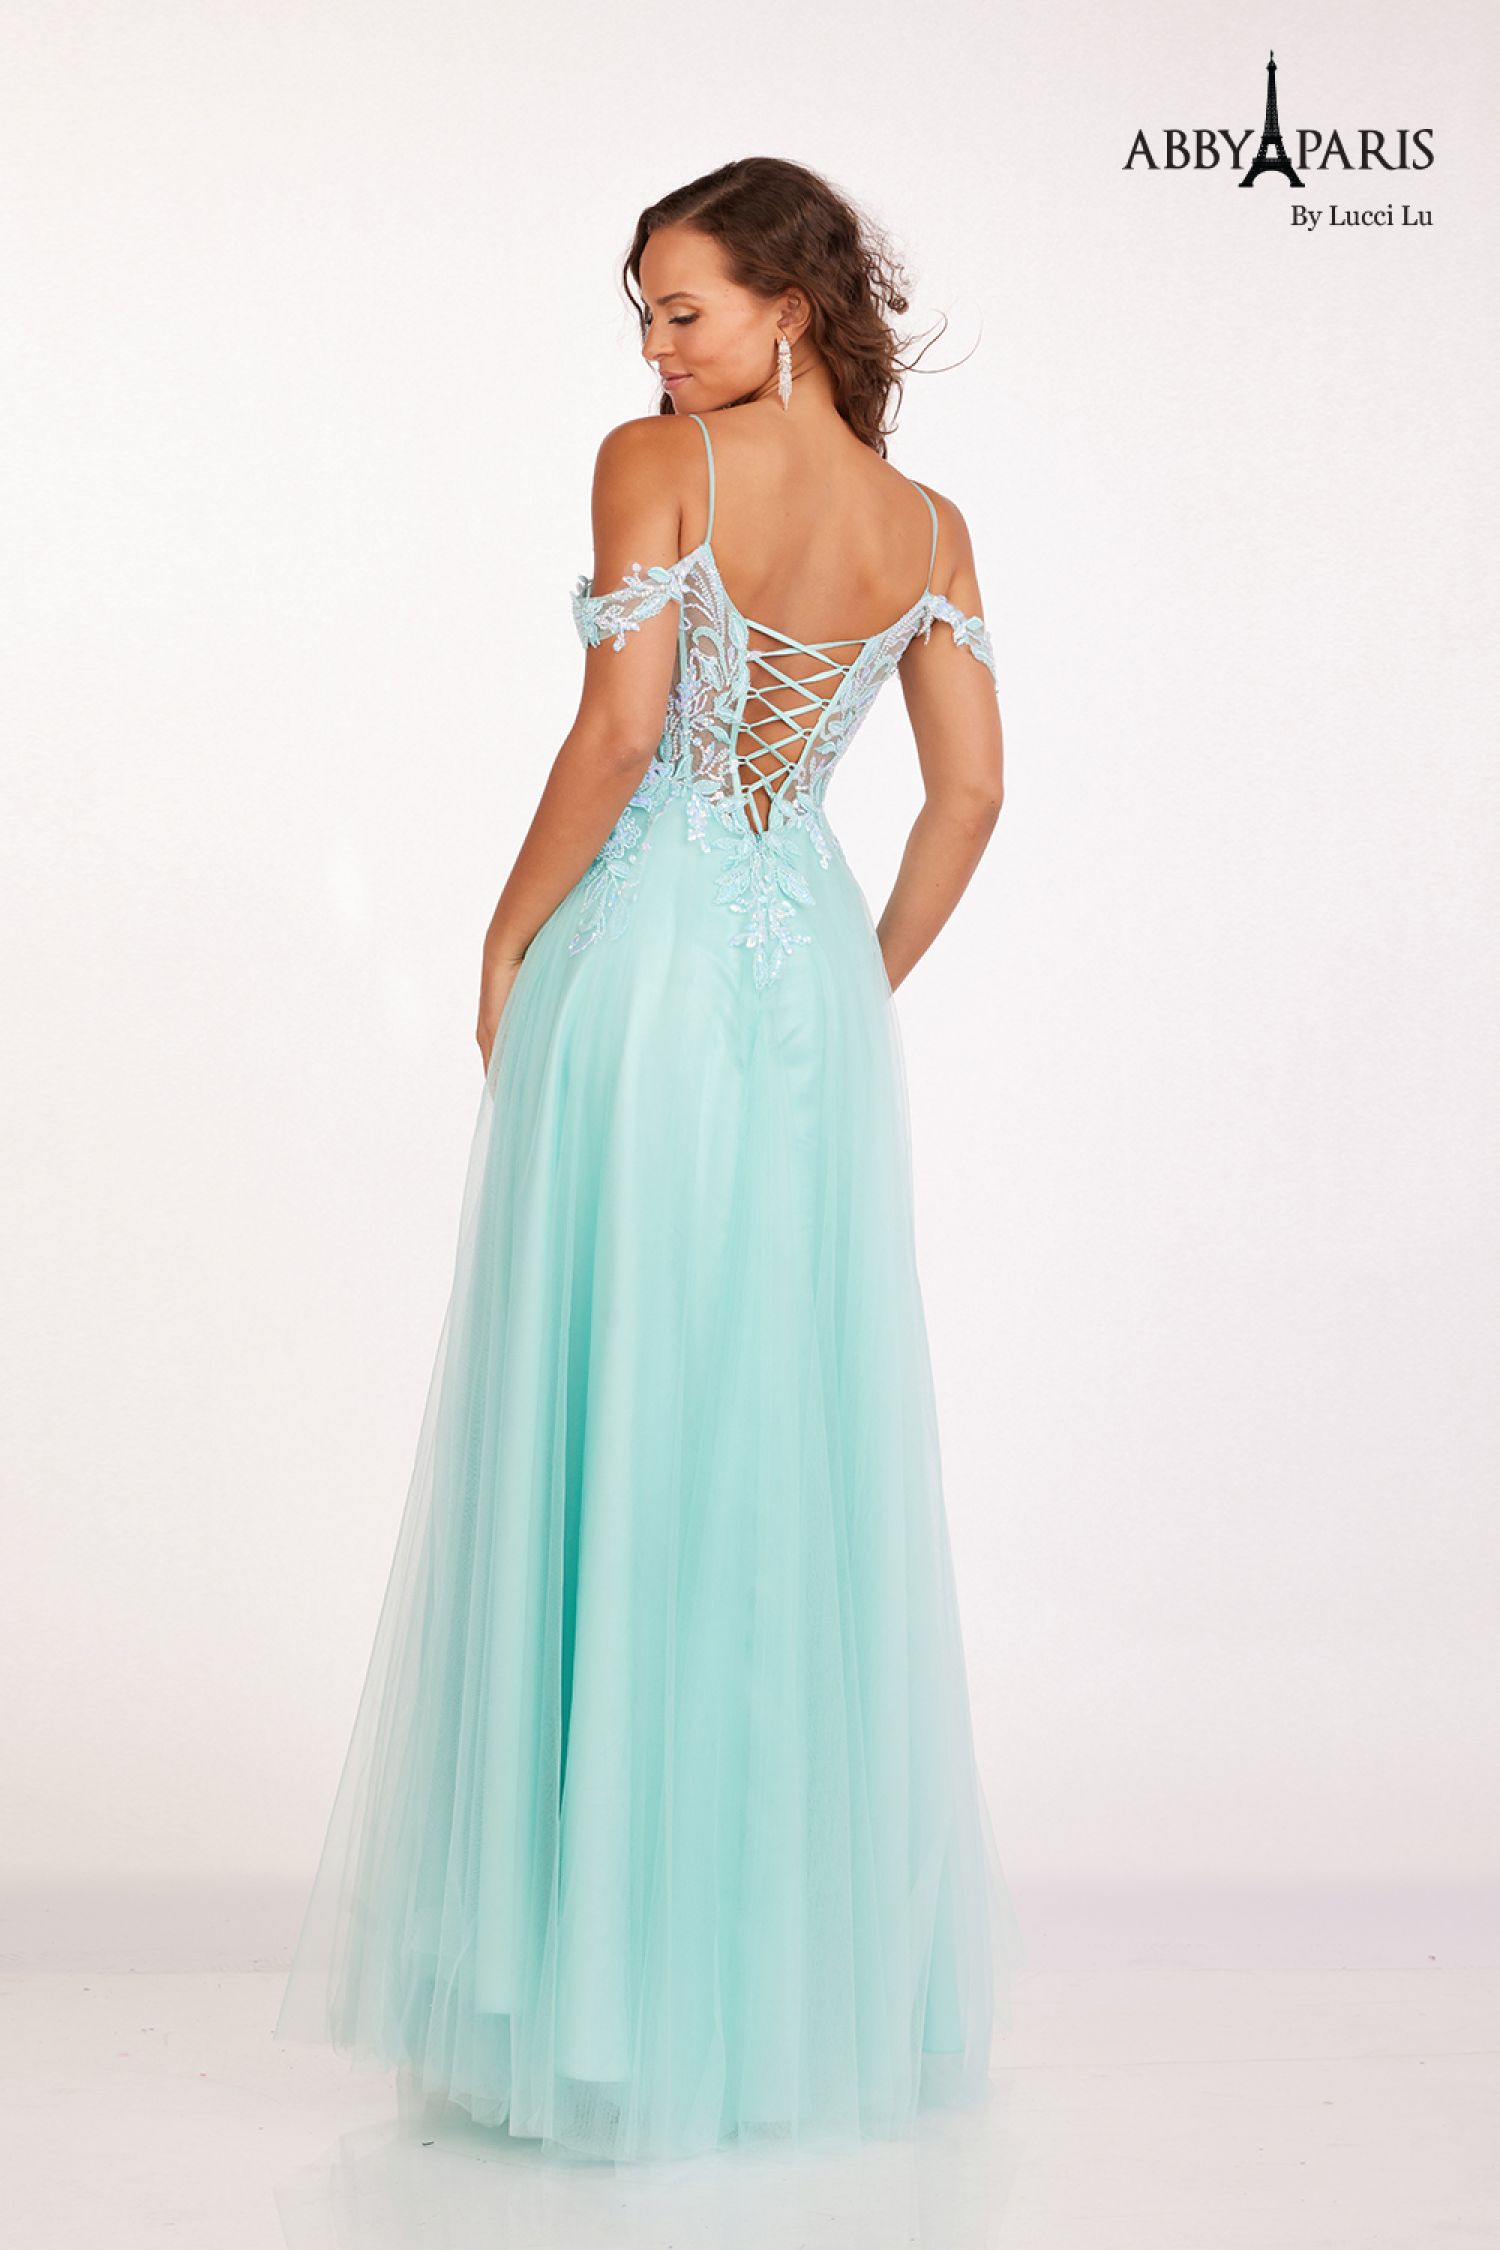 The Abby Paris 90242 Sheer Sequin Corset offers a stunning off-the-shoulder A-line silhouette, perfect for any formal event. The sheer sequin design adds a touch of glamour, while the corset structure provides a flattering fit. Make a statement and turn heads with this elegant and sophisticated prom dress.  Sizes: 0-14  Colors: Aqua